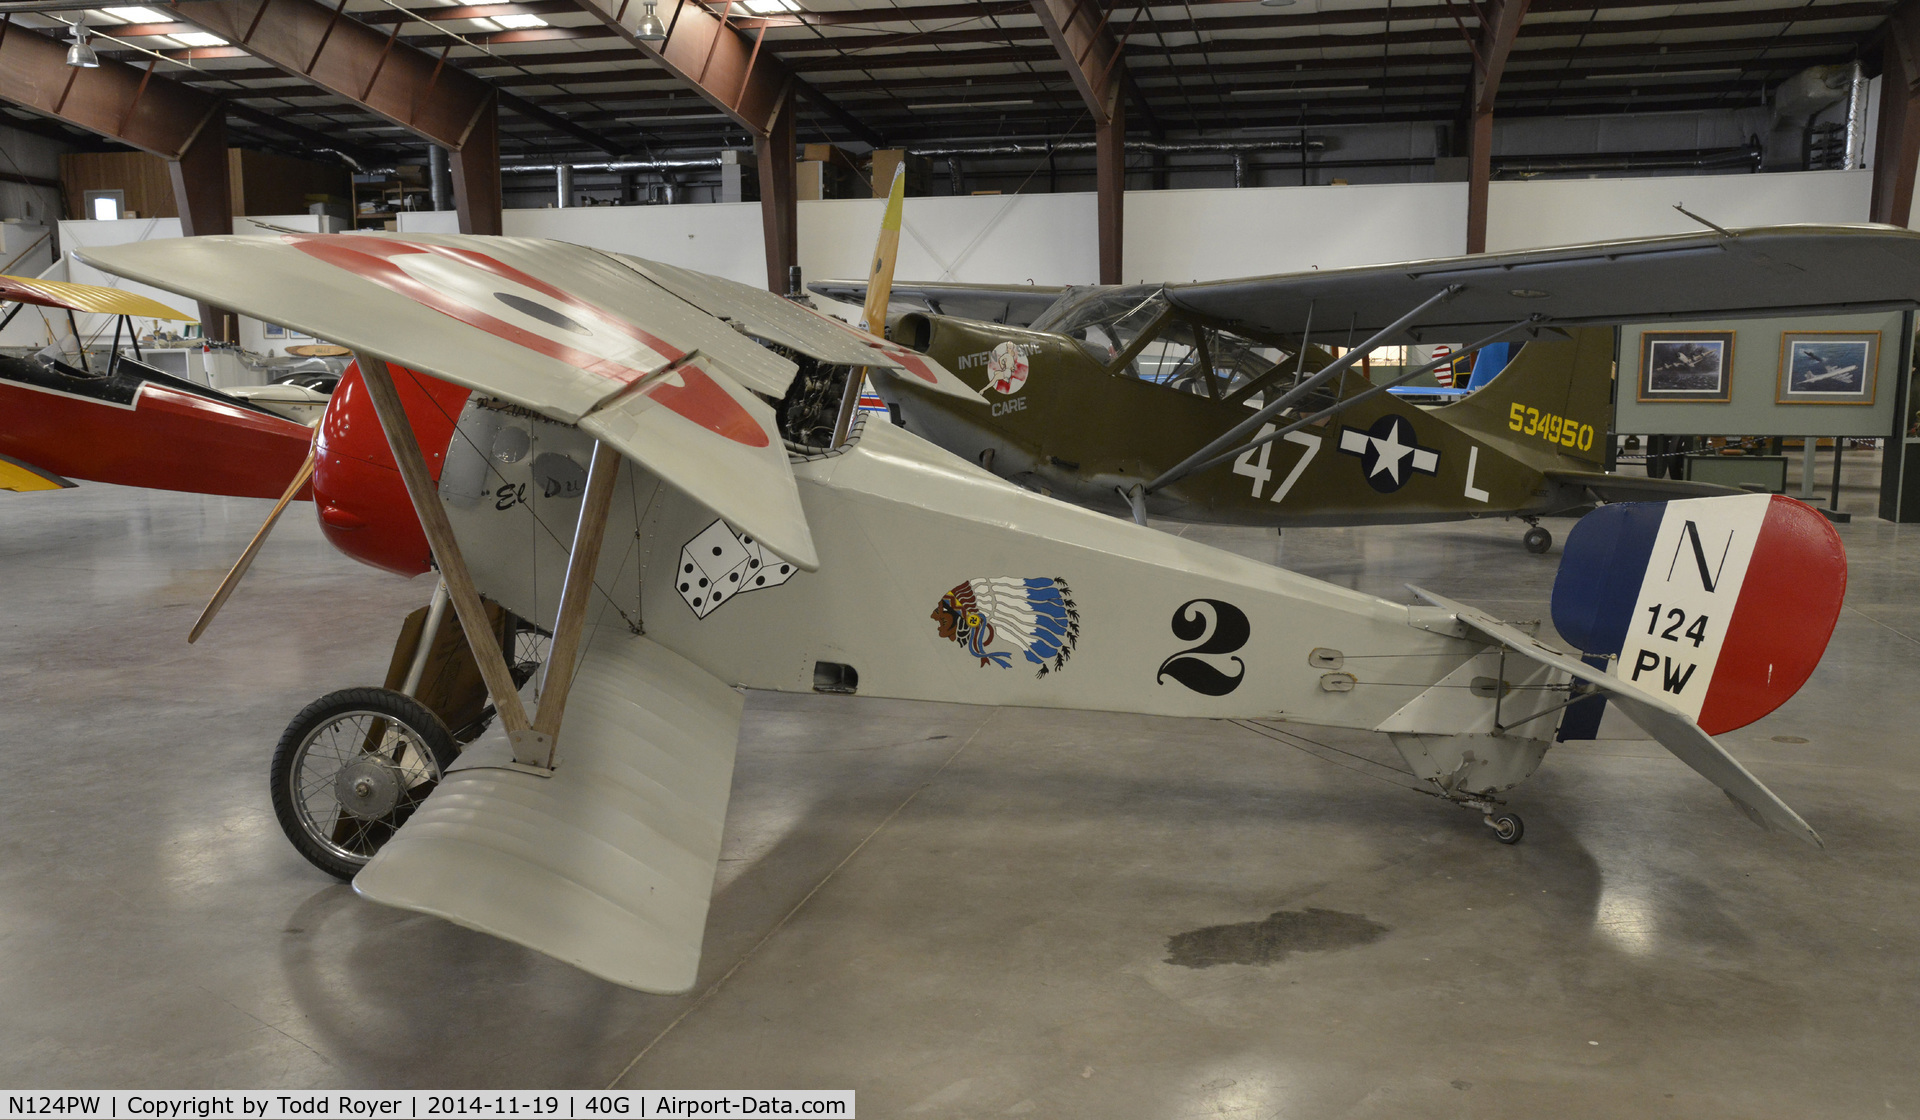 N124PW, 1998 Nieuport 17 Scout Replica C/N 621, On display at the Planes of Fame Valle location